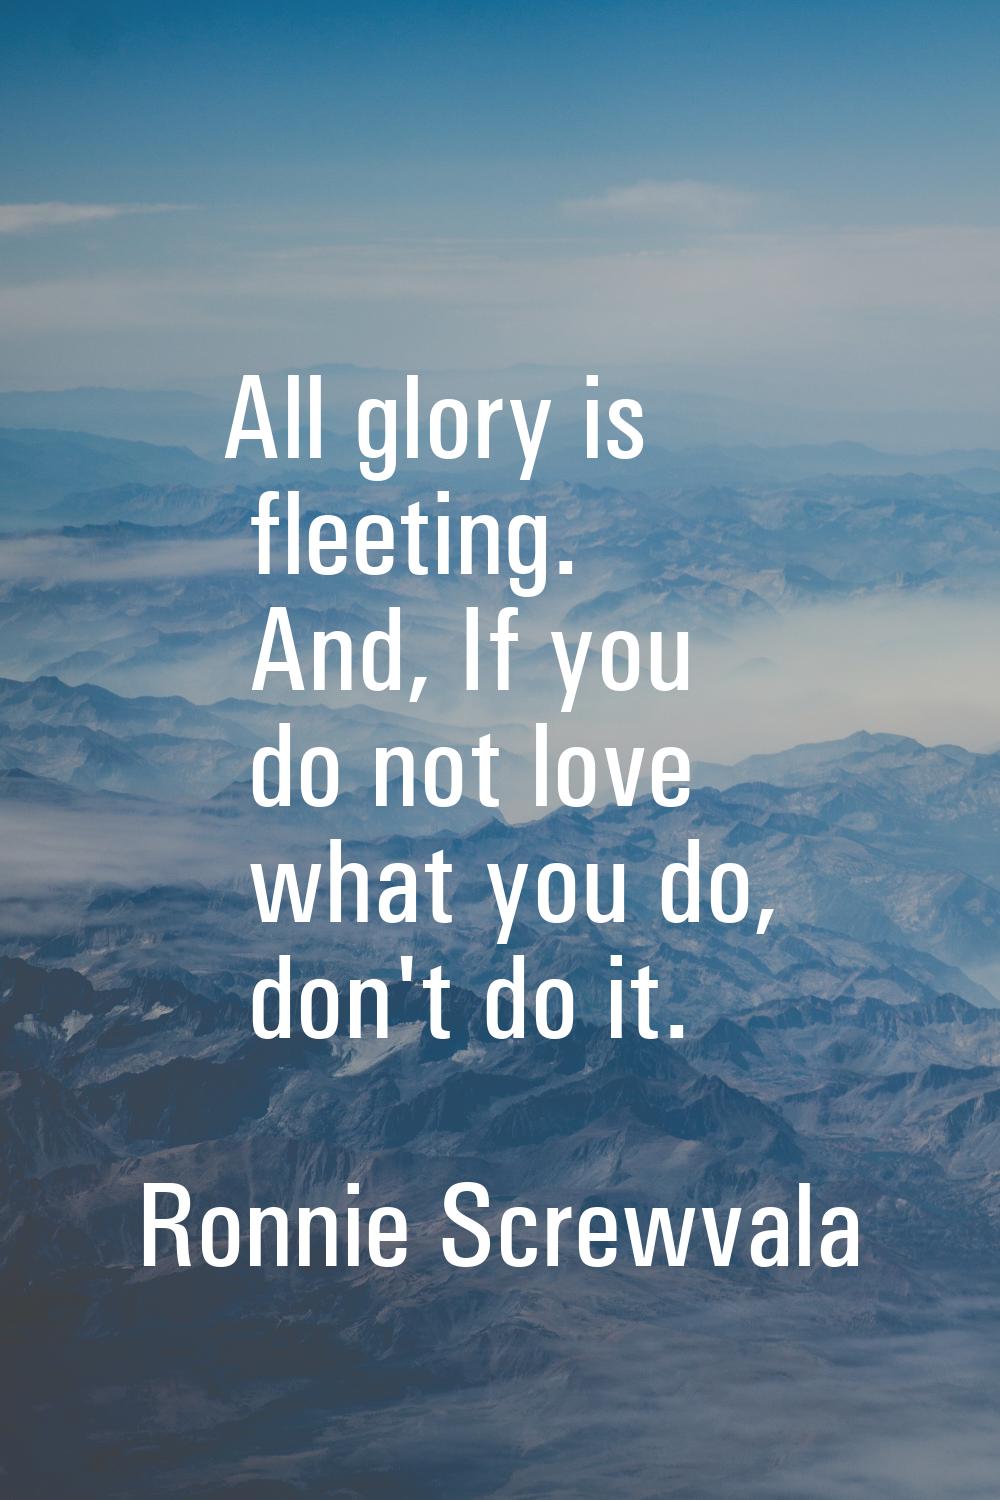 All glory is fleeting. And, If you do not love what you do, don't do it.